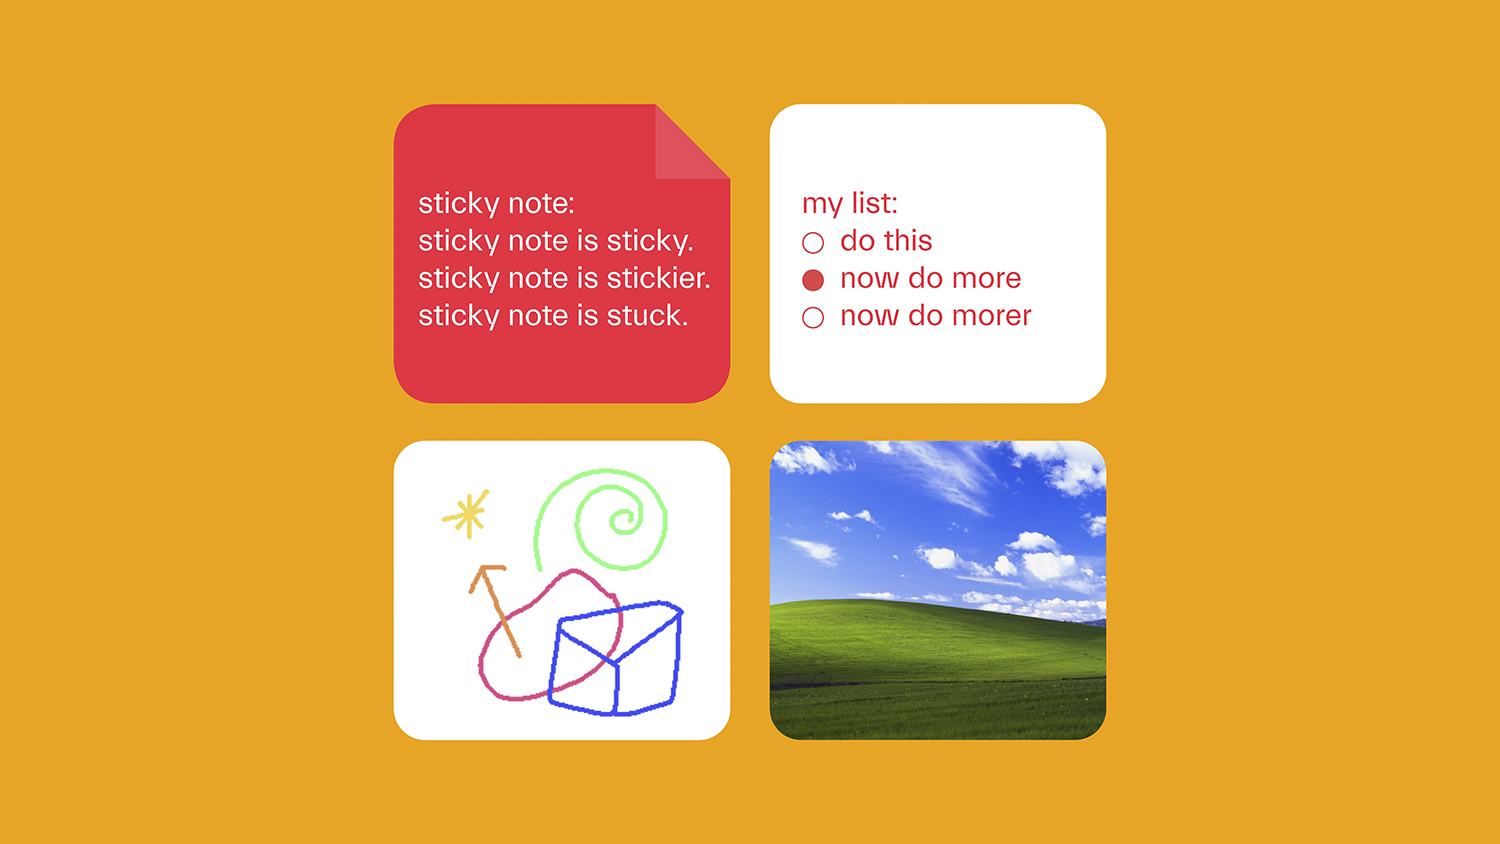 App features: sticky notes, lists, doodles and photos.